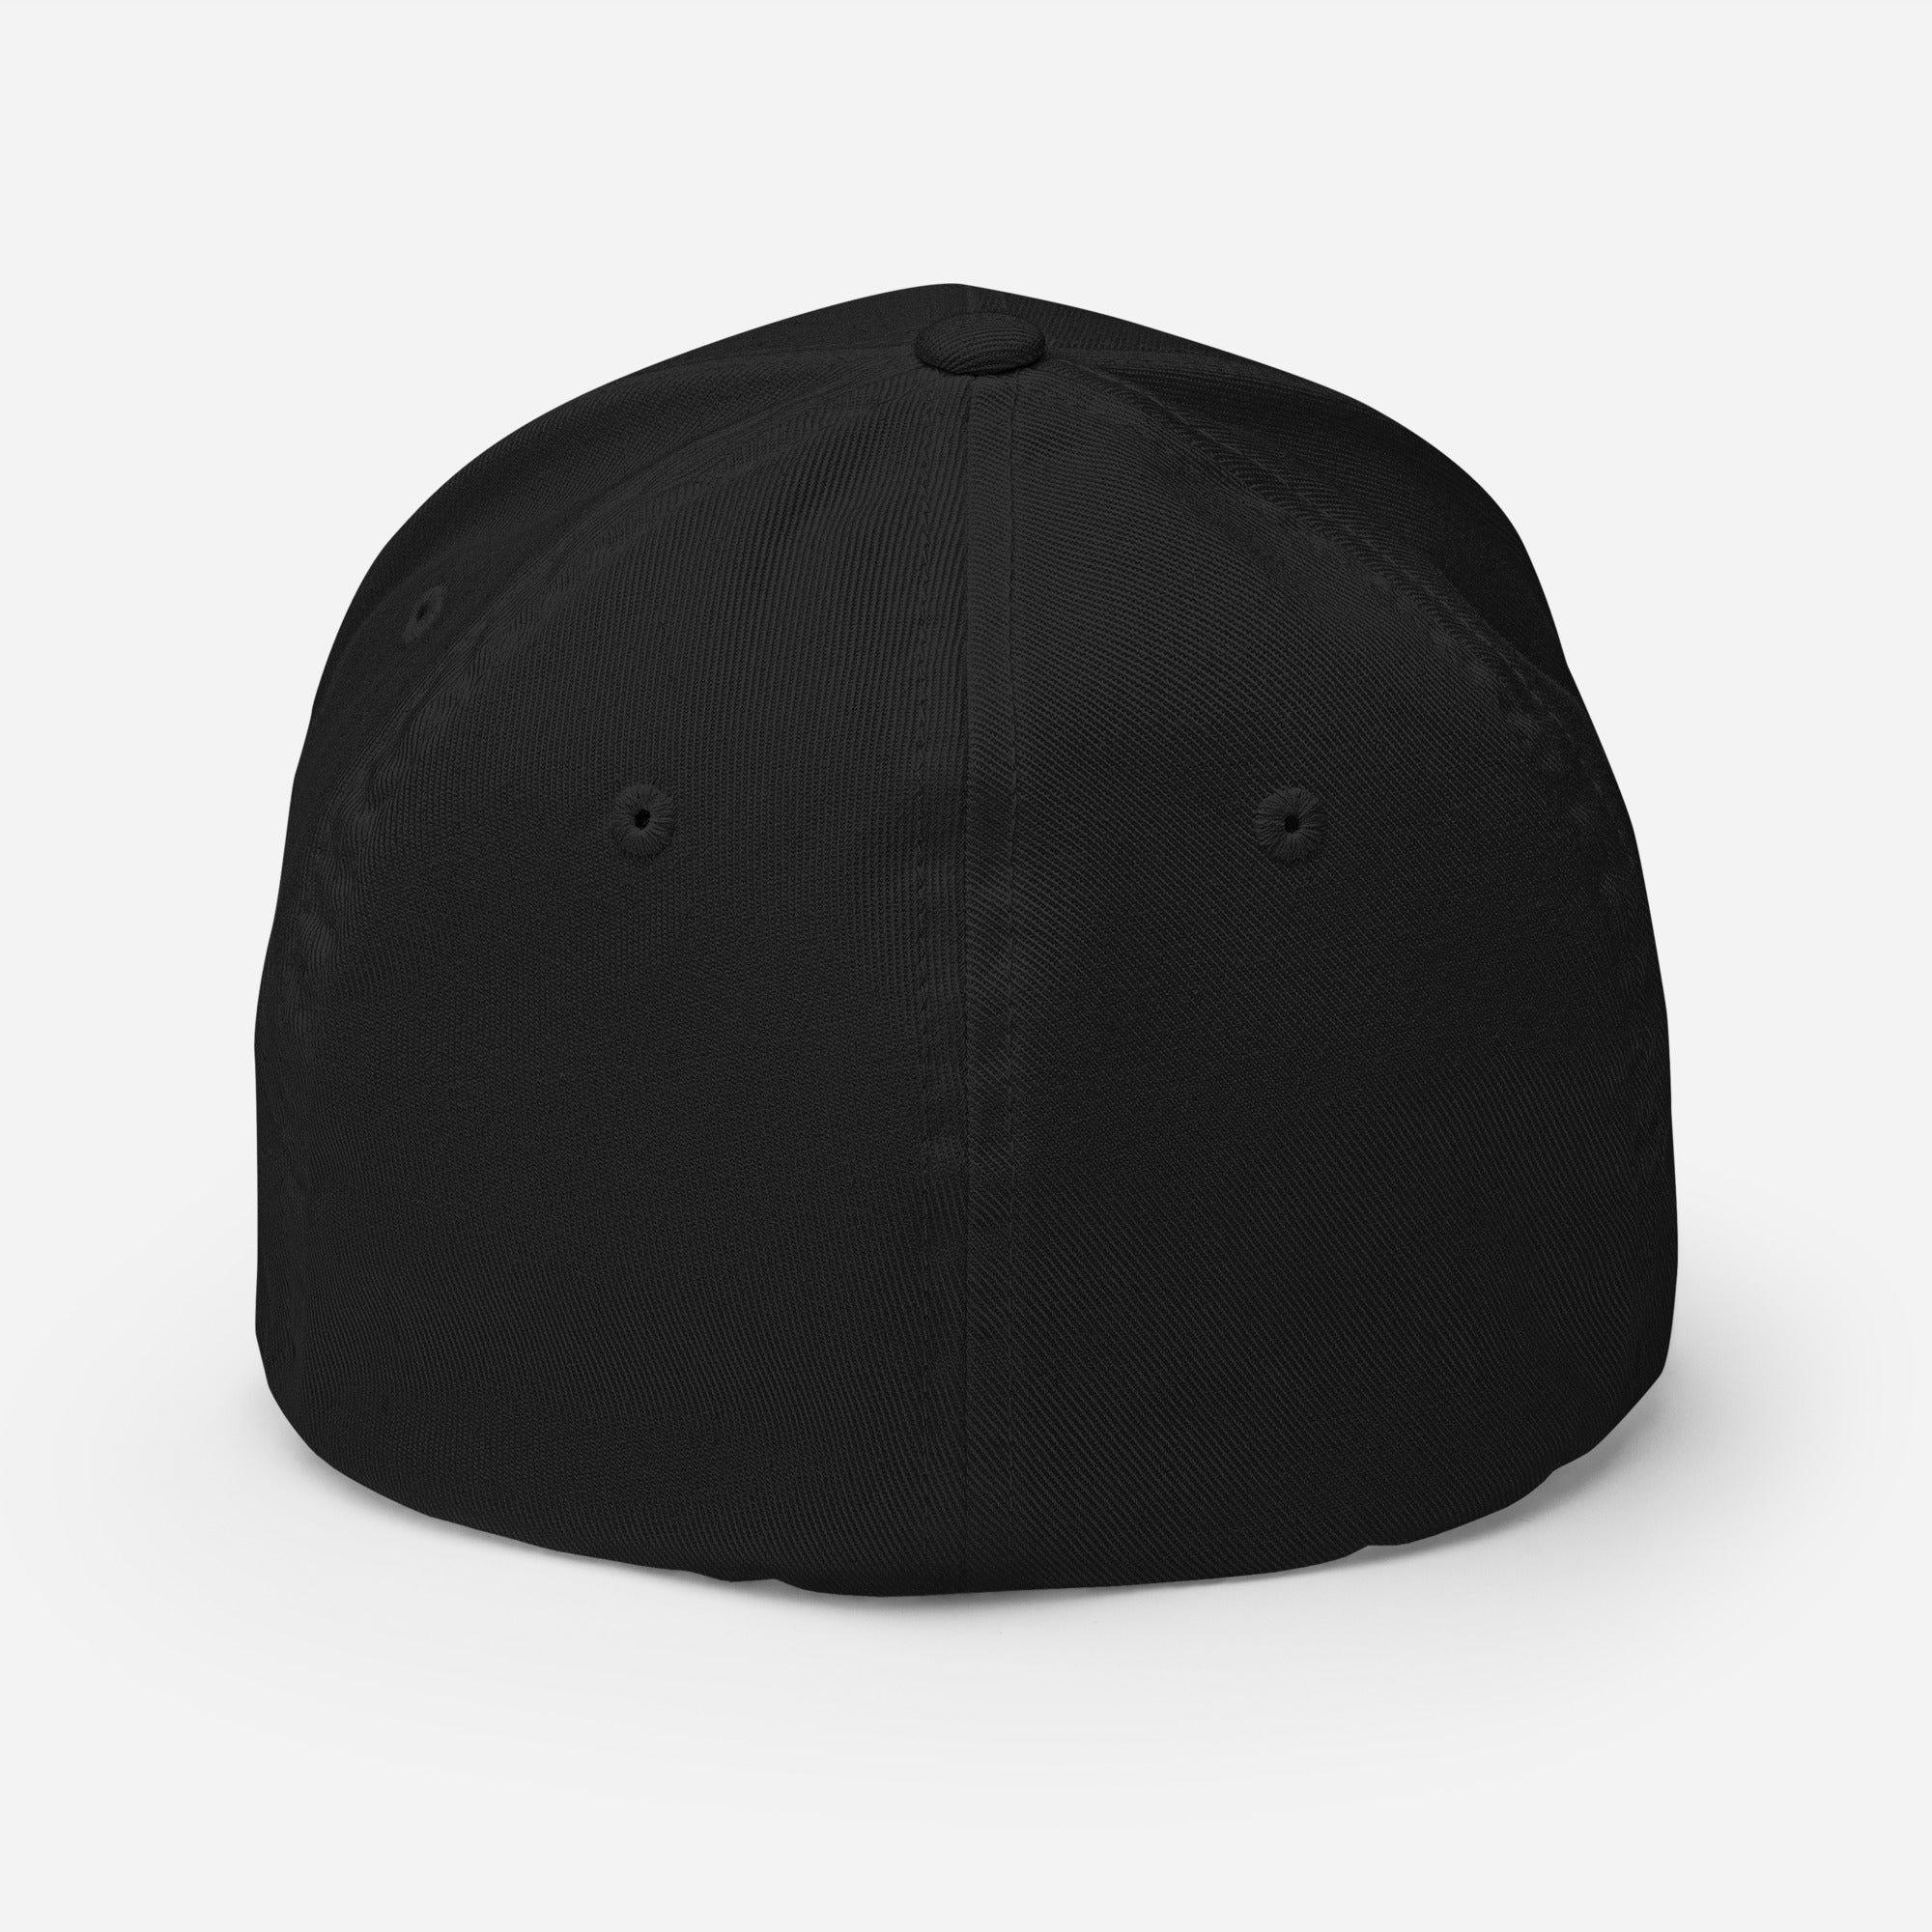 Provision Promise Angel Structured Flexfit Twill Cap